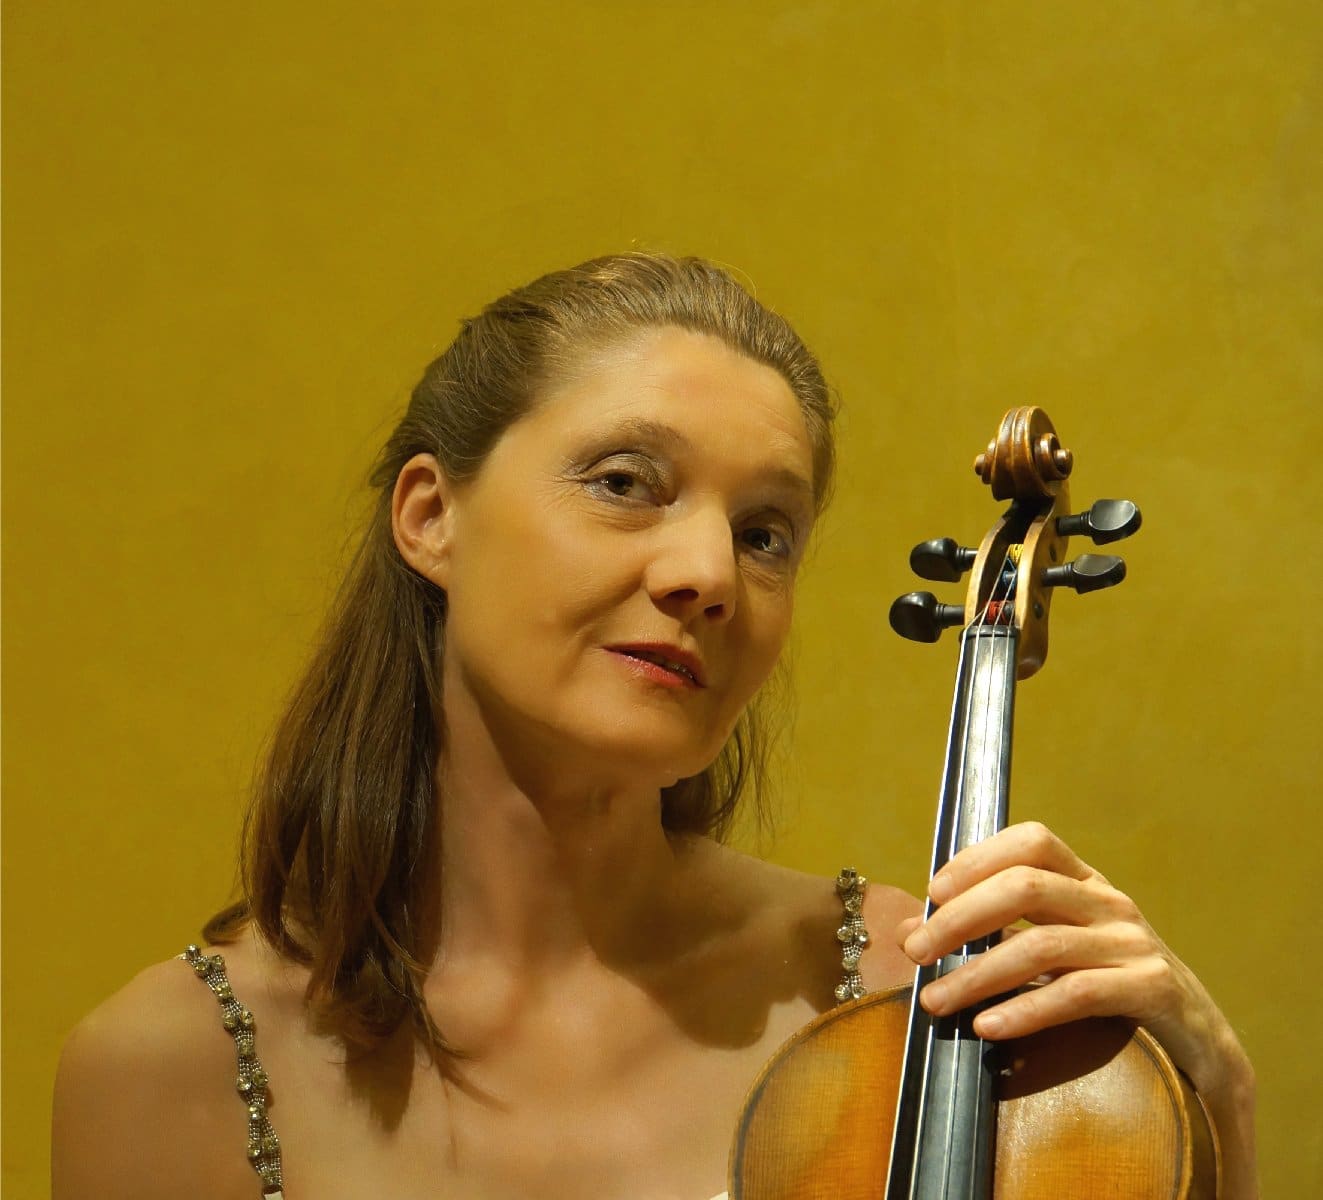 Alarm for viola player, missing since rehearsal row